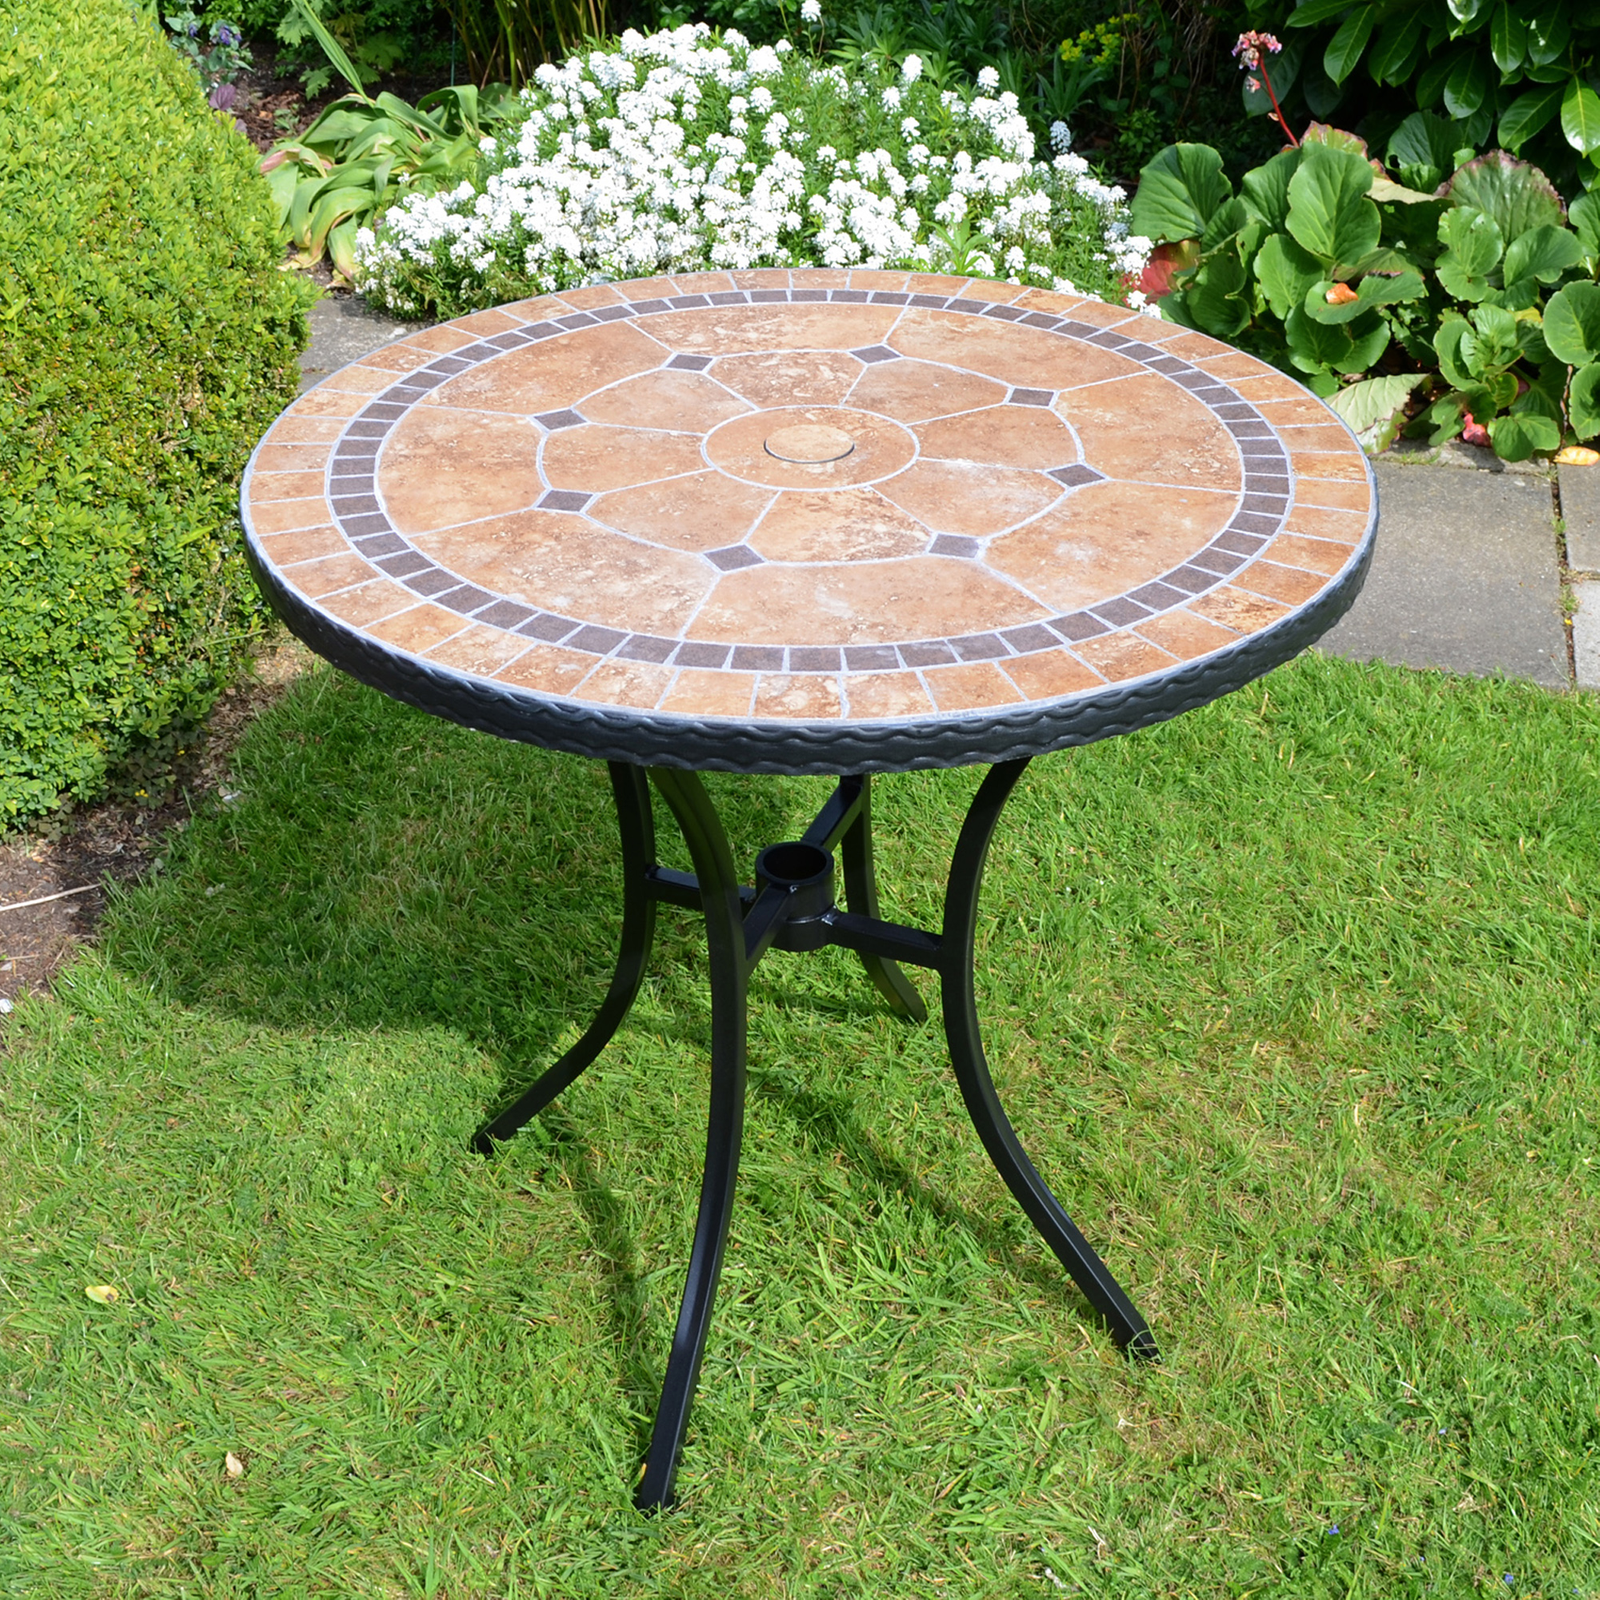 Exclusive Garden Richmond 76cm Table With 2 Ascot Chairs Set Dining Sets Exclusive Garden   